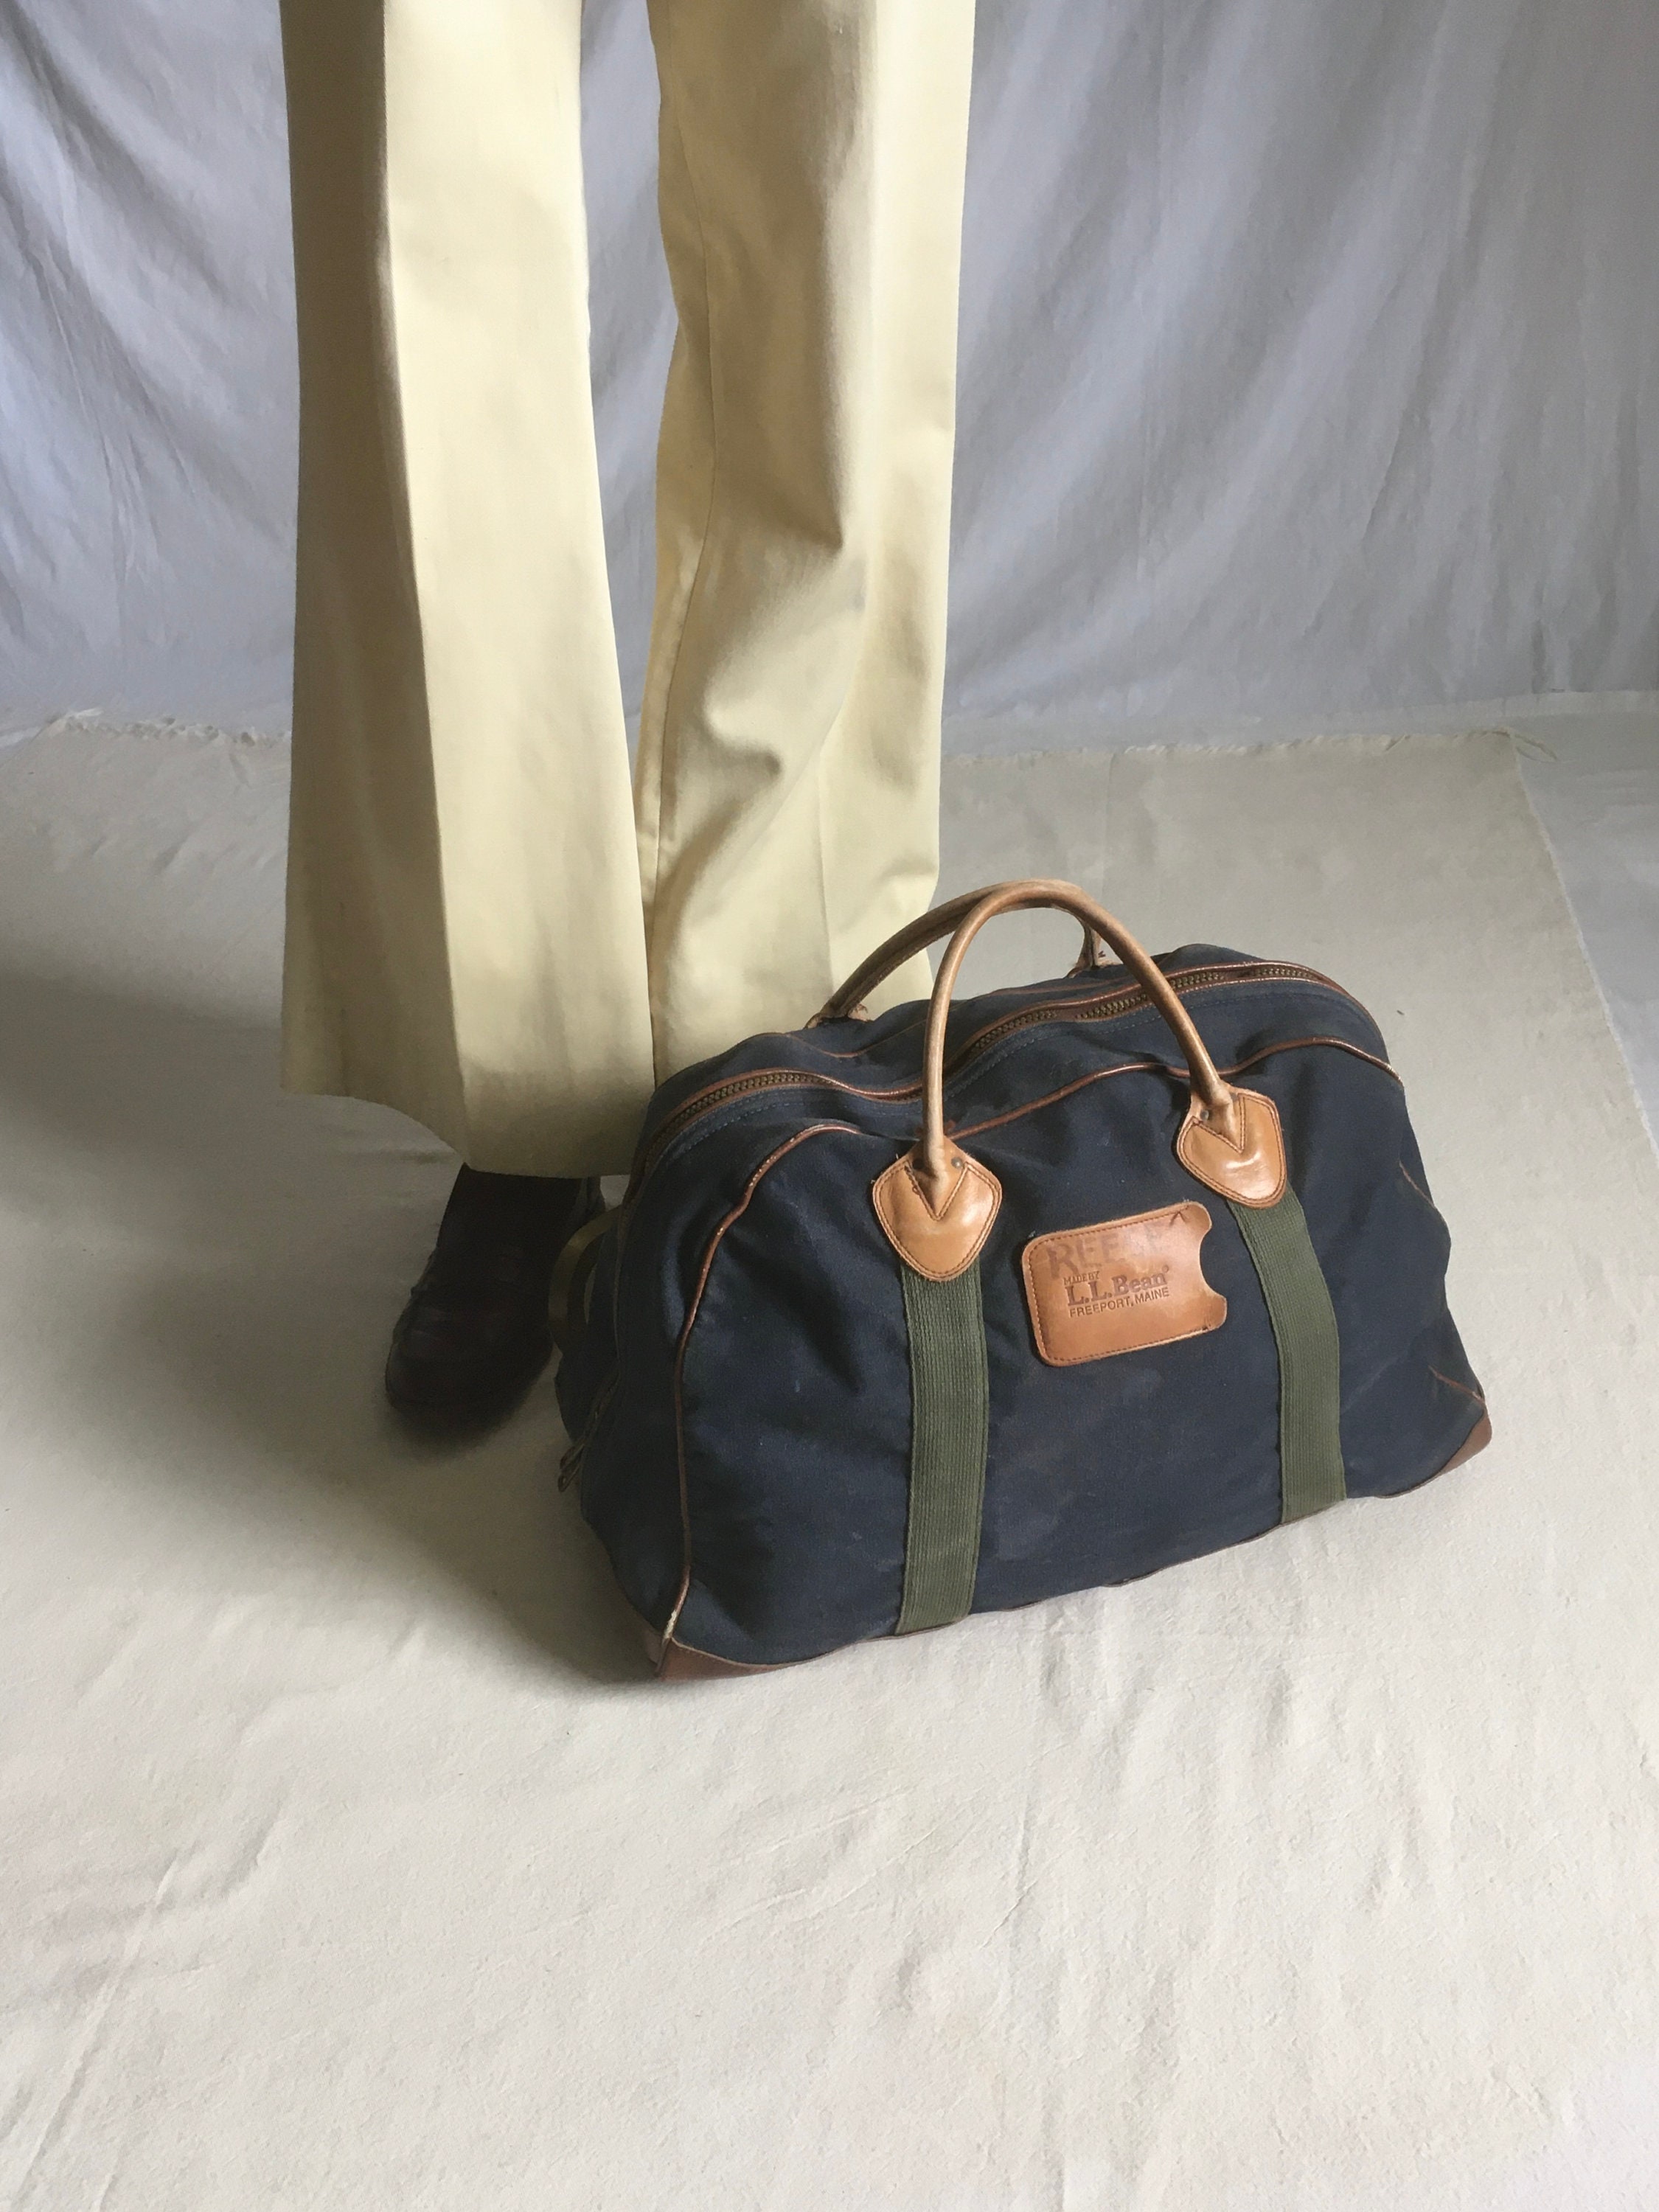 Leather and Waxed Canvas Mason, Tool & Travel Bag 16 